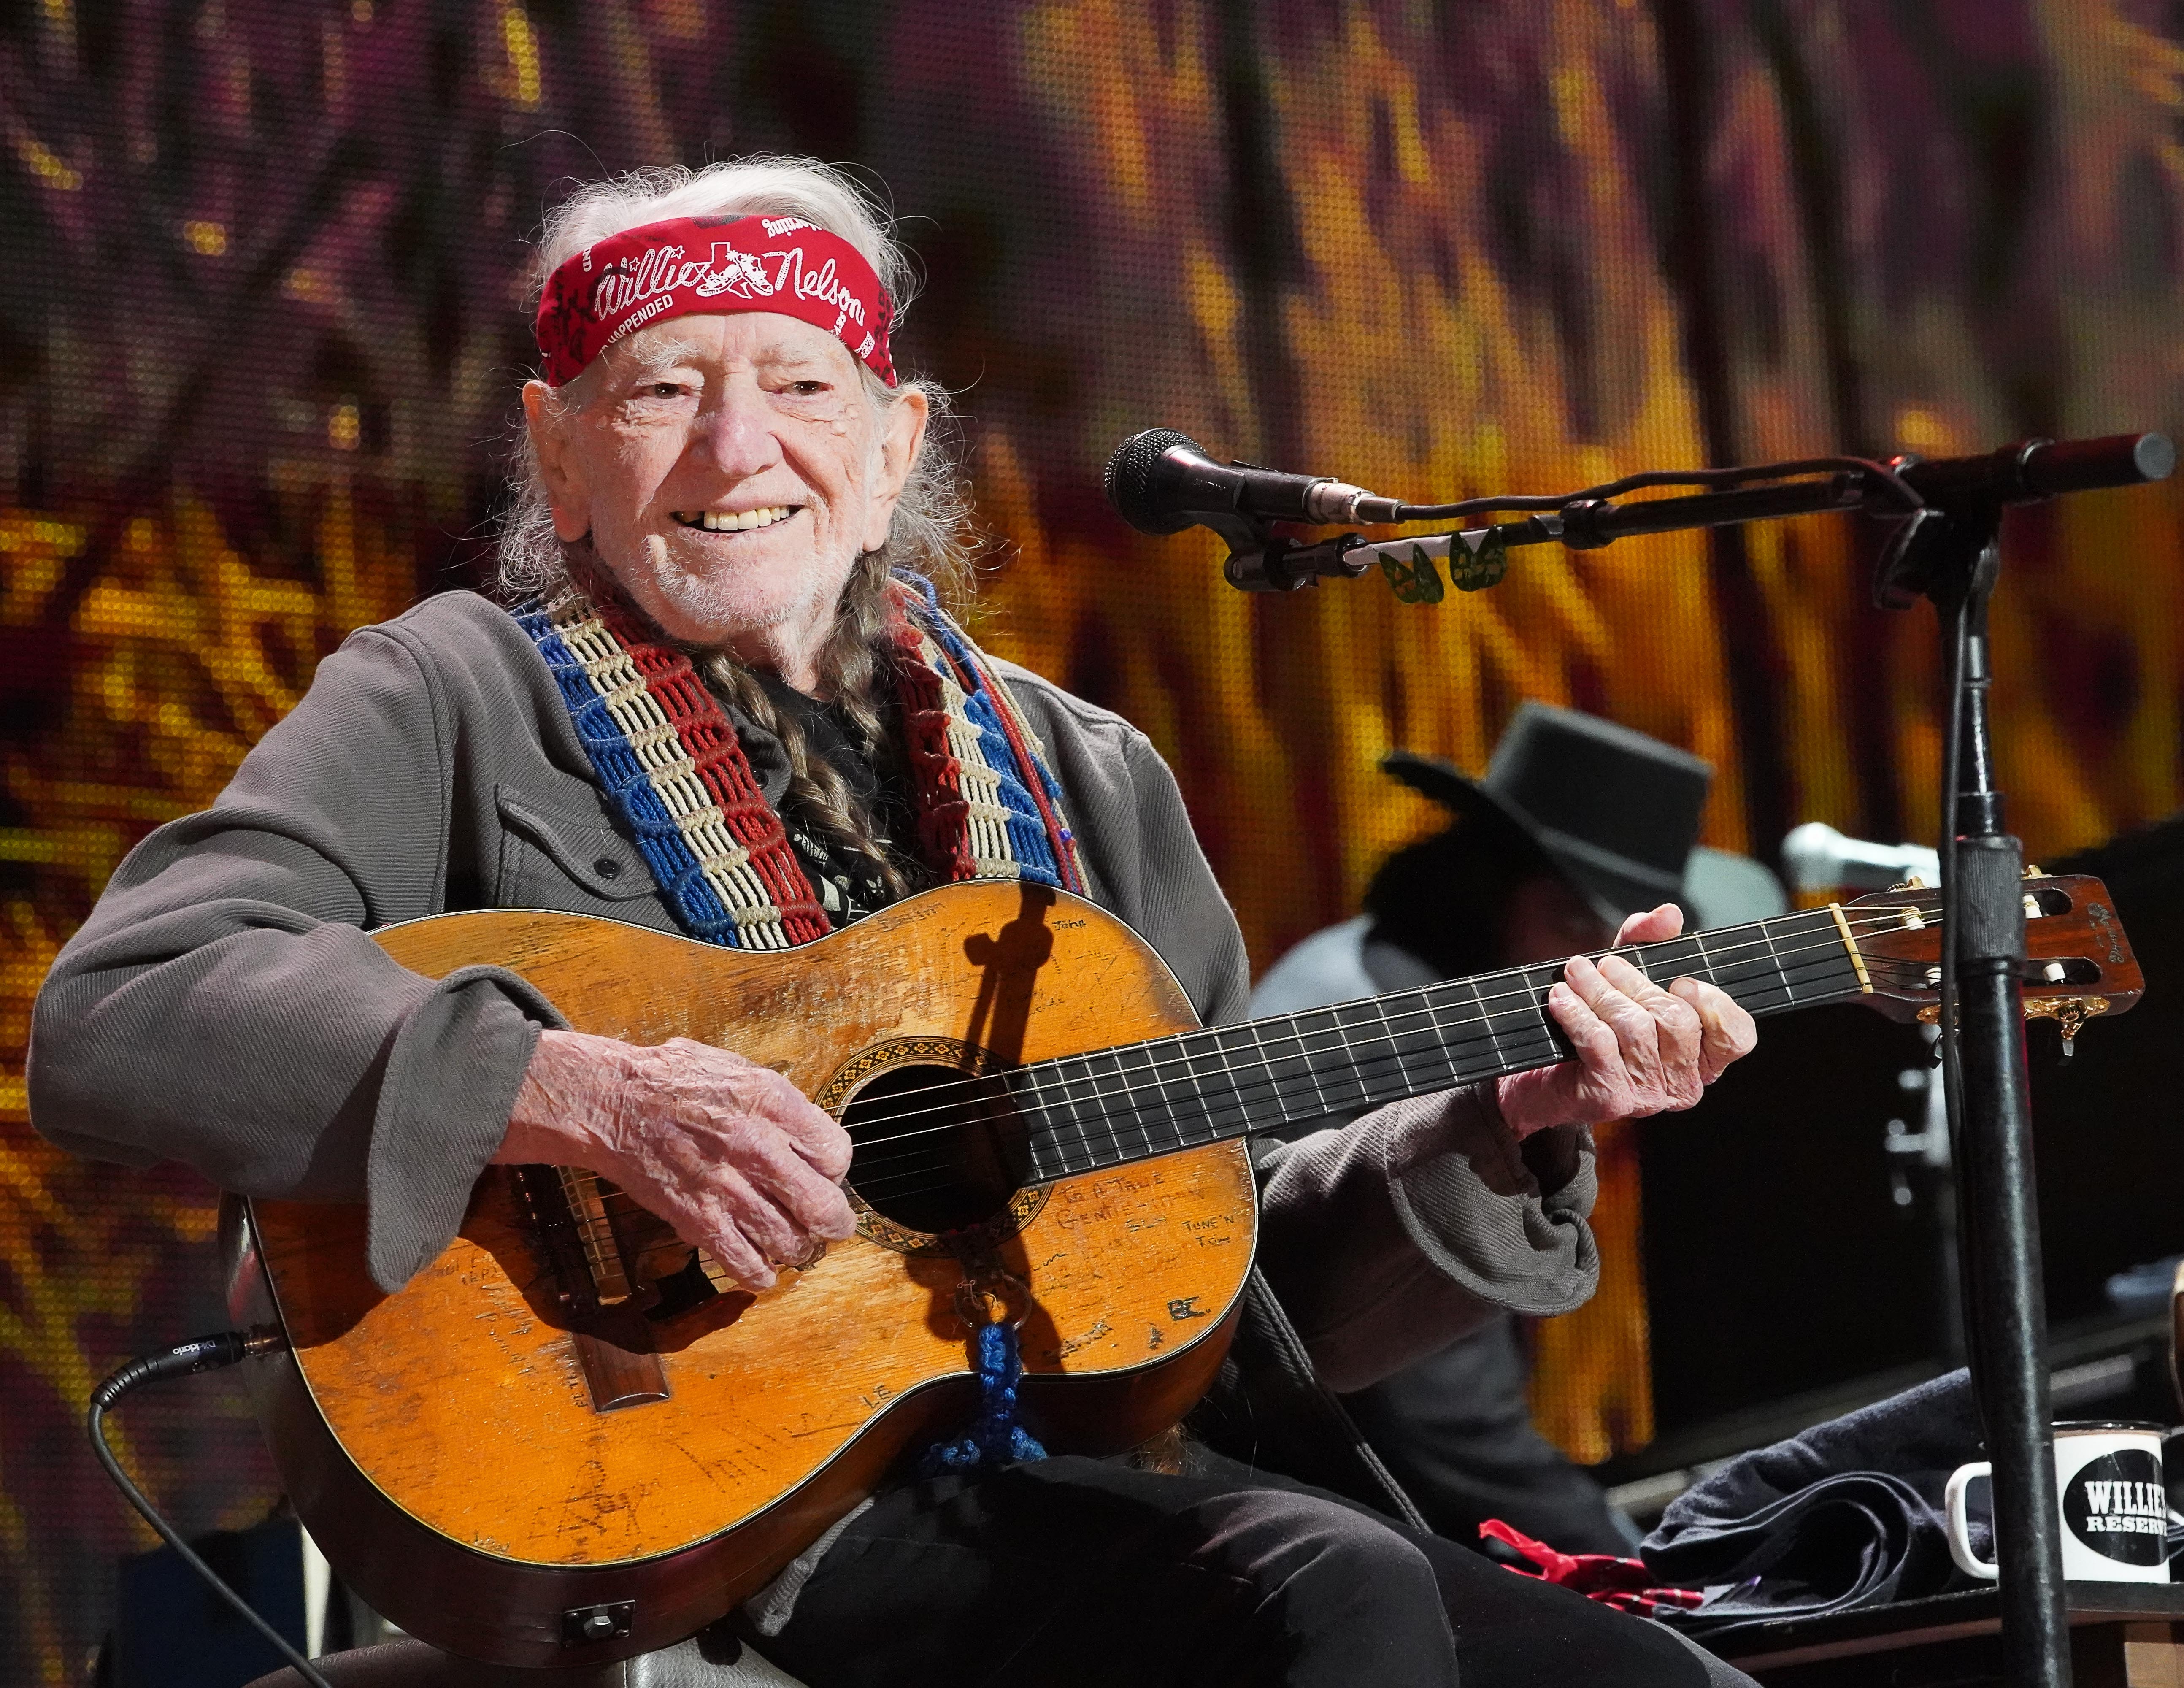 Willie’s Circle of Harmony: Dylan Strikes a Chord, Legends Unite for Farm Aid’s Good Karma